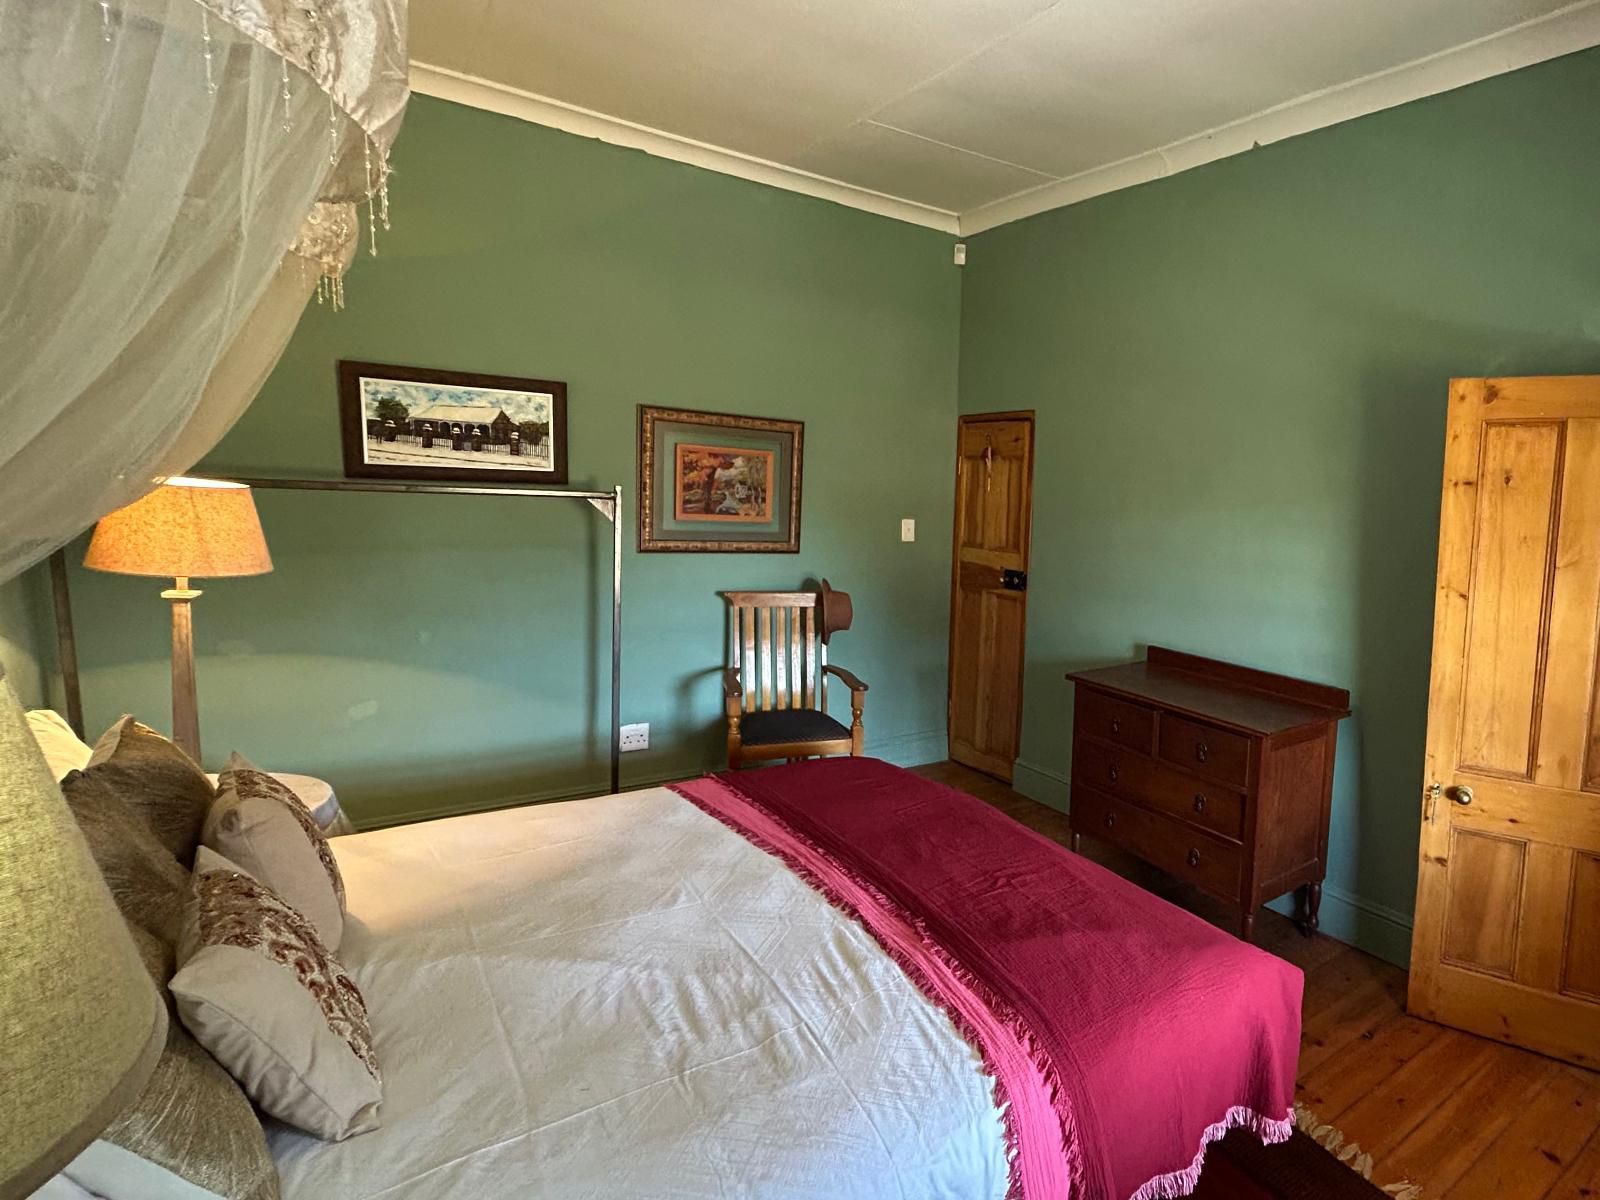 The Old Country House And Cottage Fouriesburg Free State South Africa Bedroom